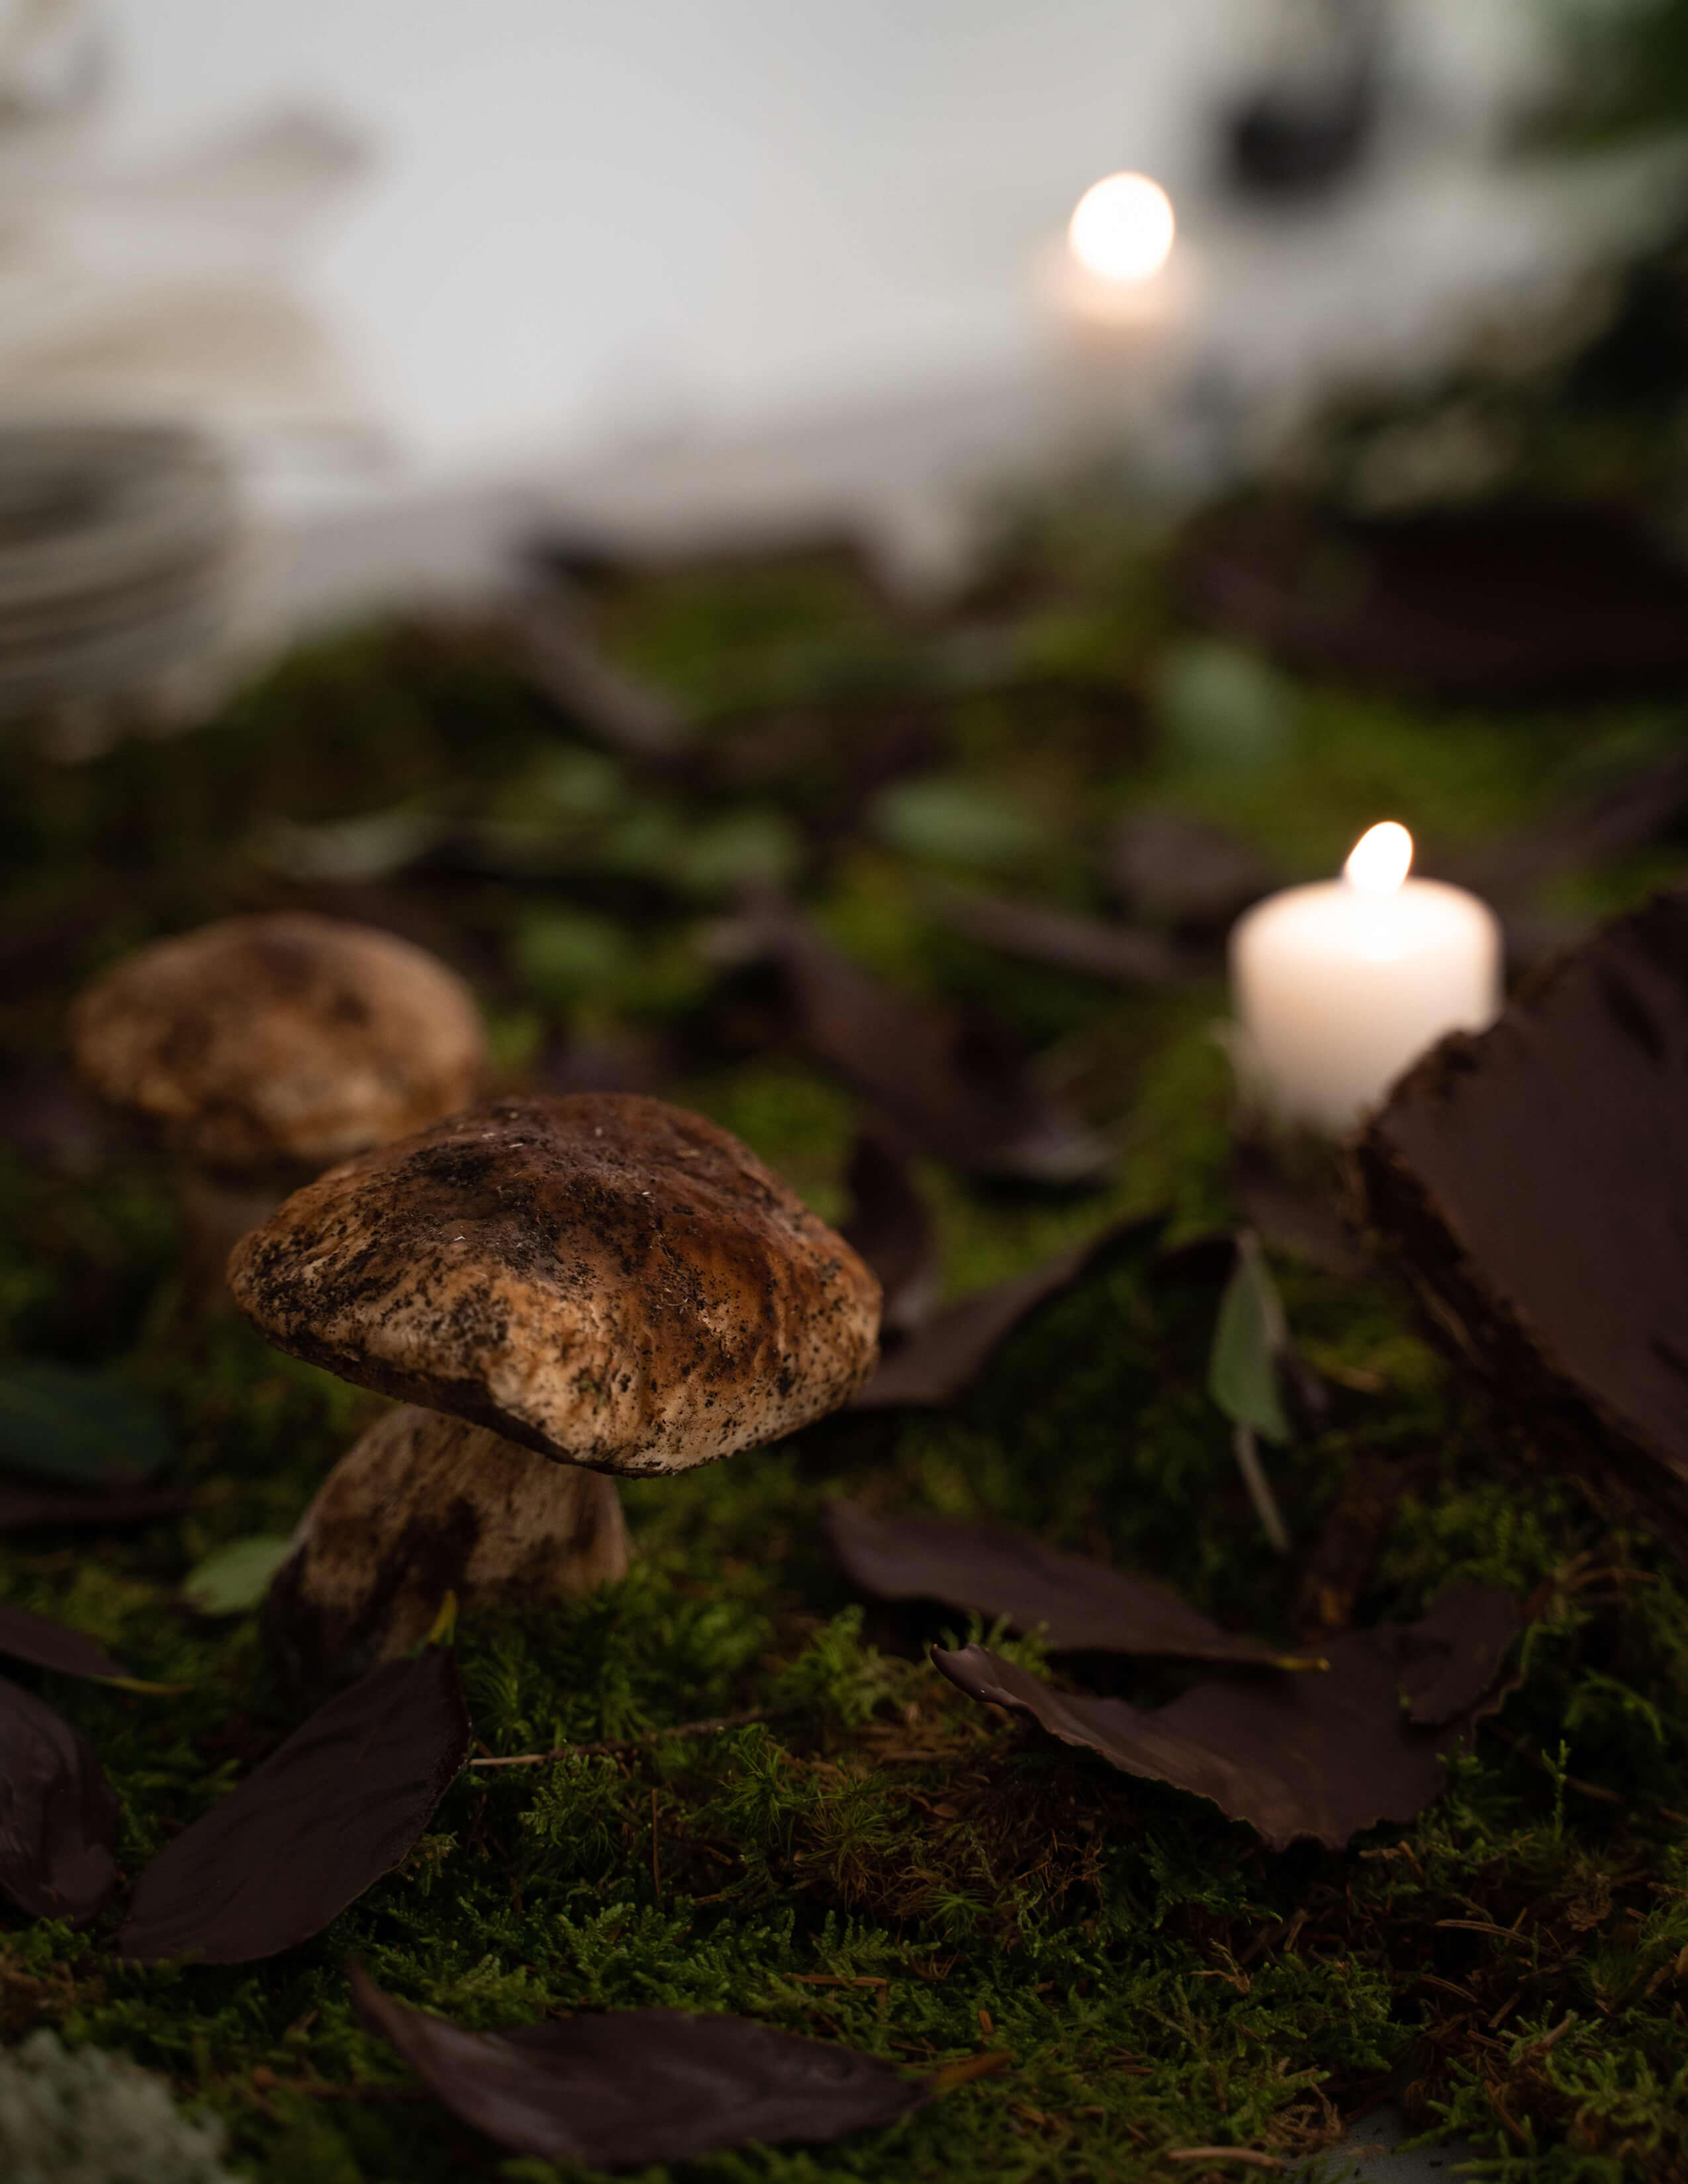 Mushrooms grow among the moss while loads of dark leaves lie around including some candles.